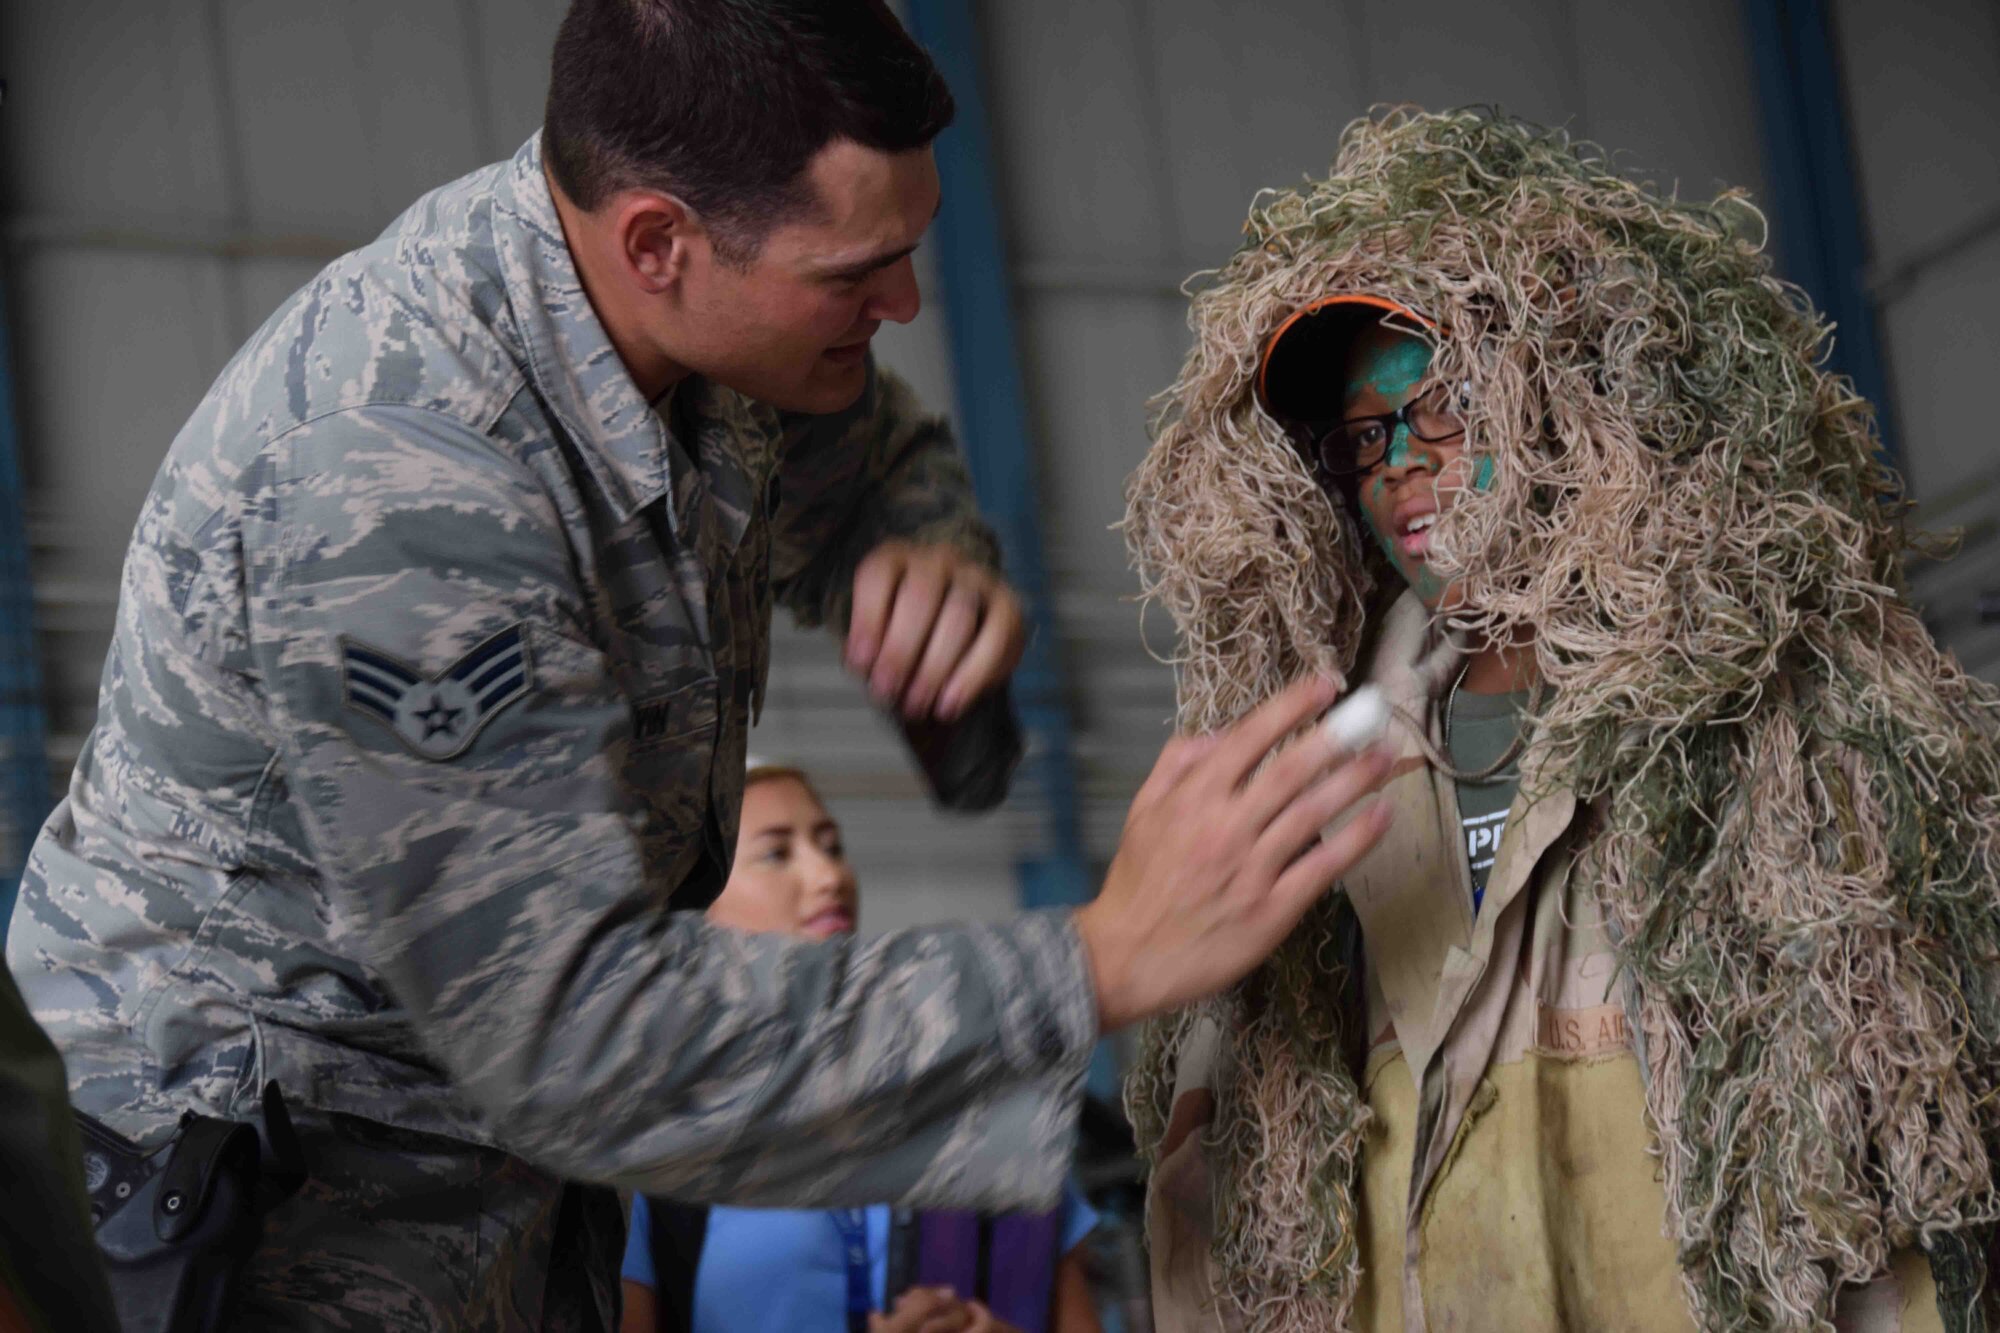 Combat weapons instructor, Senior Airman Cory Irwin from the 37th Training Squadron, helps Raphael Webb don a Ghillie suit, at the weapons display at Joint Base San Antonio-Lackland’s Operation Junior Expeditionary Team on July 31, 2015. The children also climbed aboard a Humvee and toured a C-5A Galaxy aircraft. (U.S. Air Force photo/Tech. Sgt. Carlos J. Trevino)